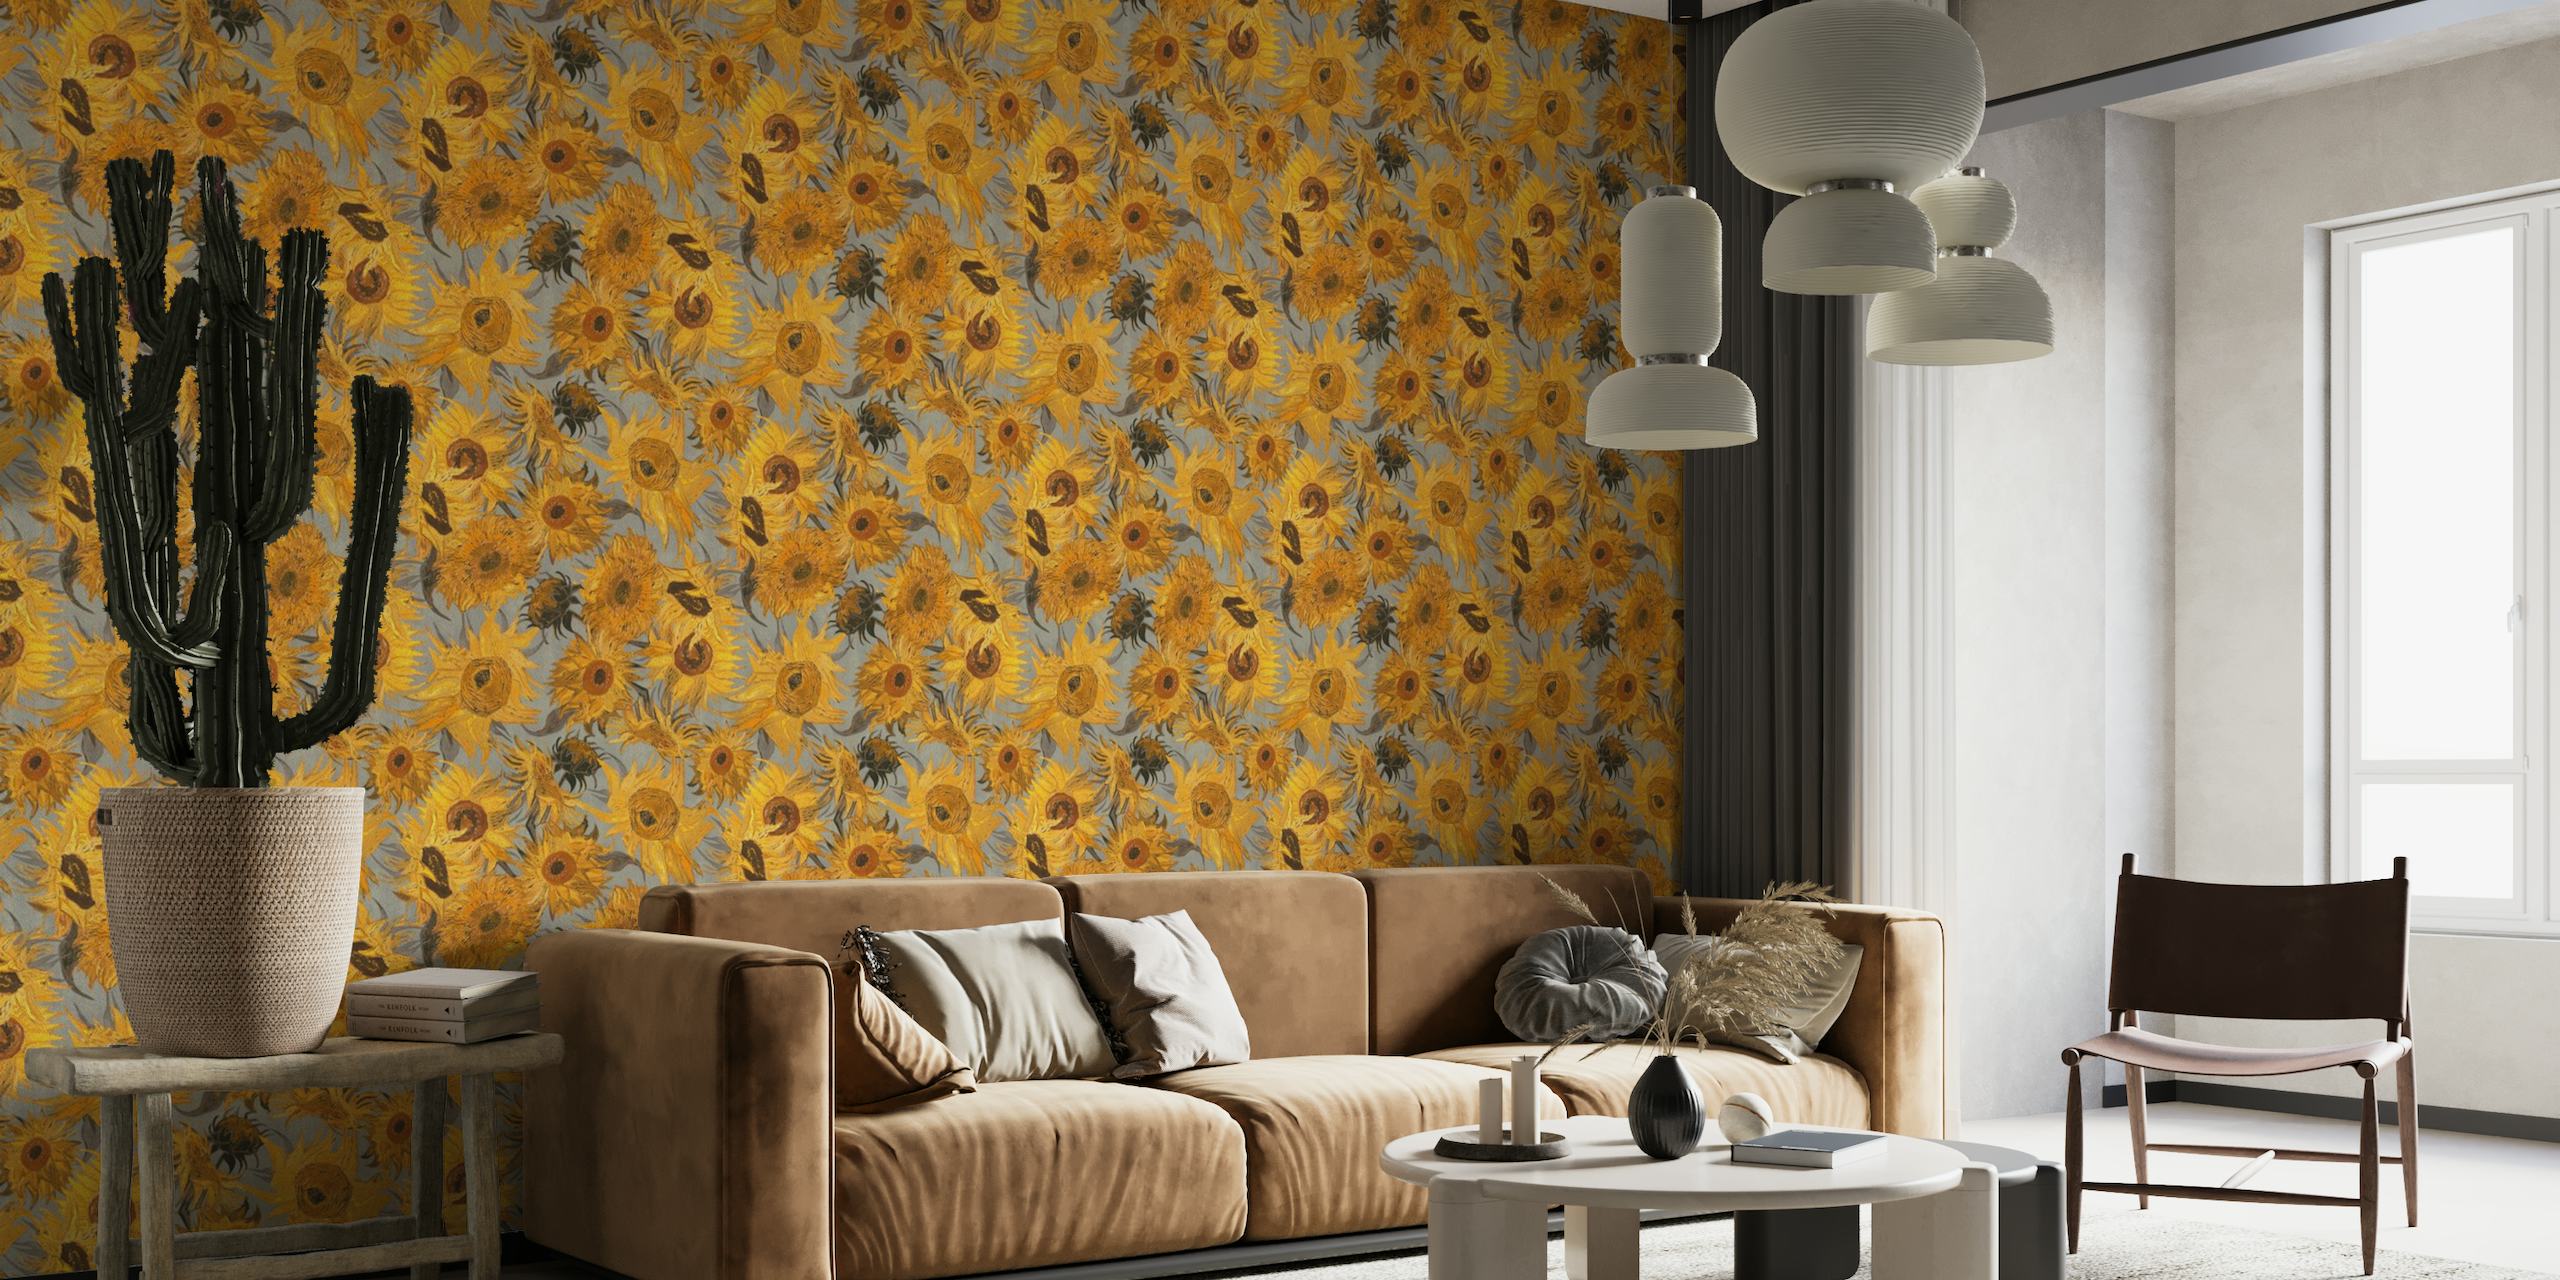 Van Gogh Sunflowers Pattern in yellow, grey, rust and brown wallpaper